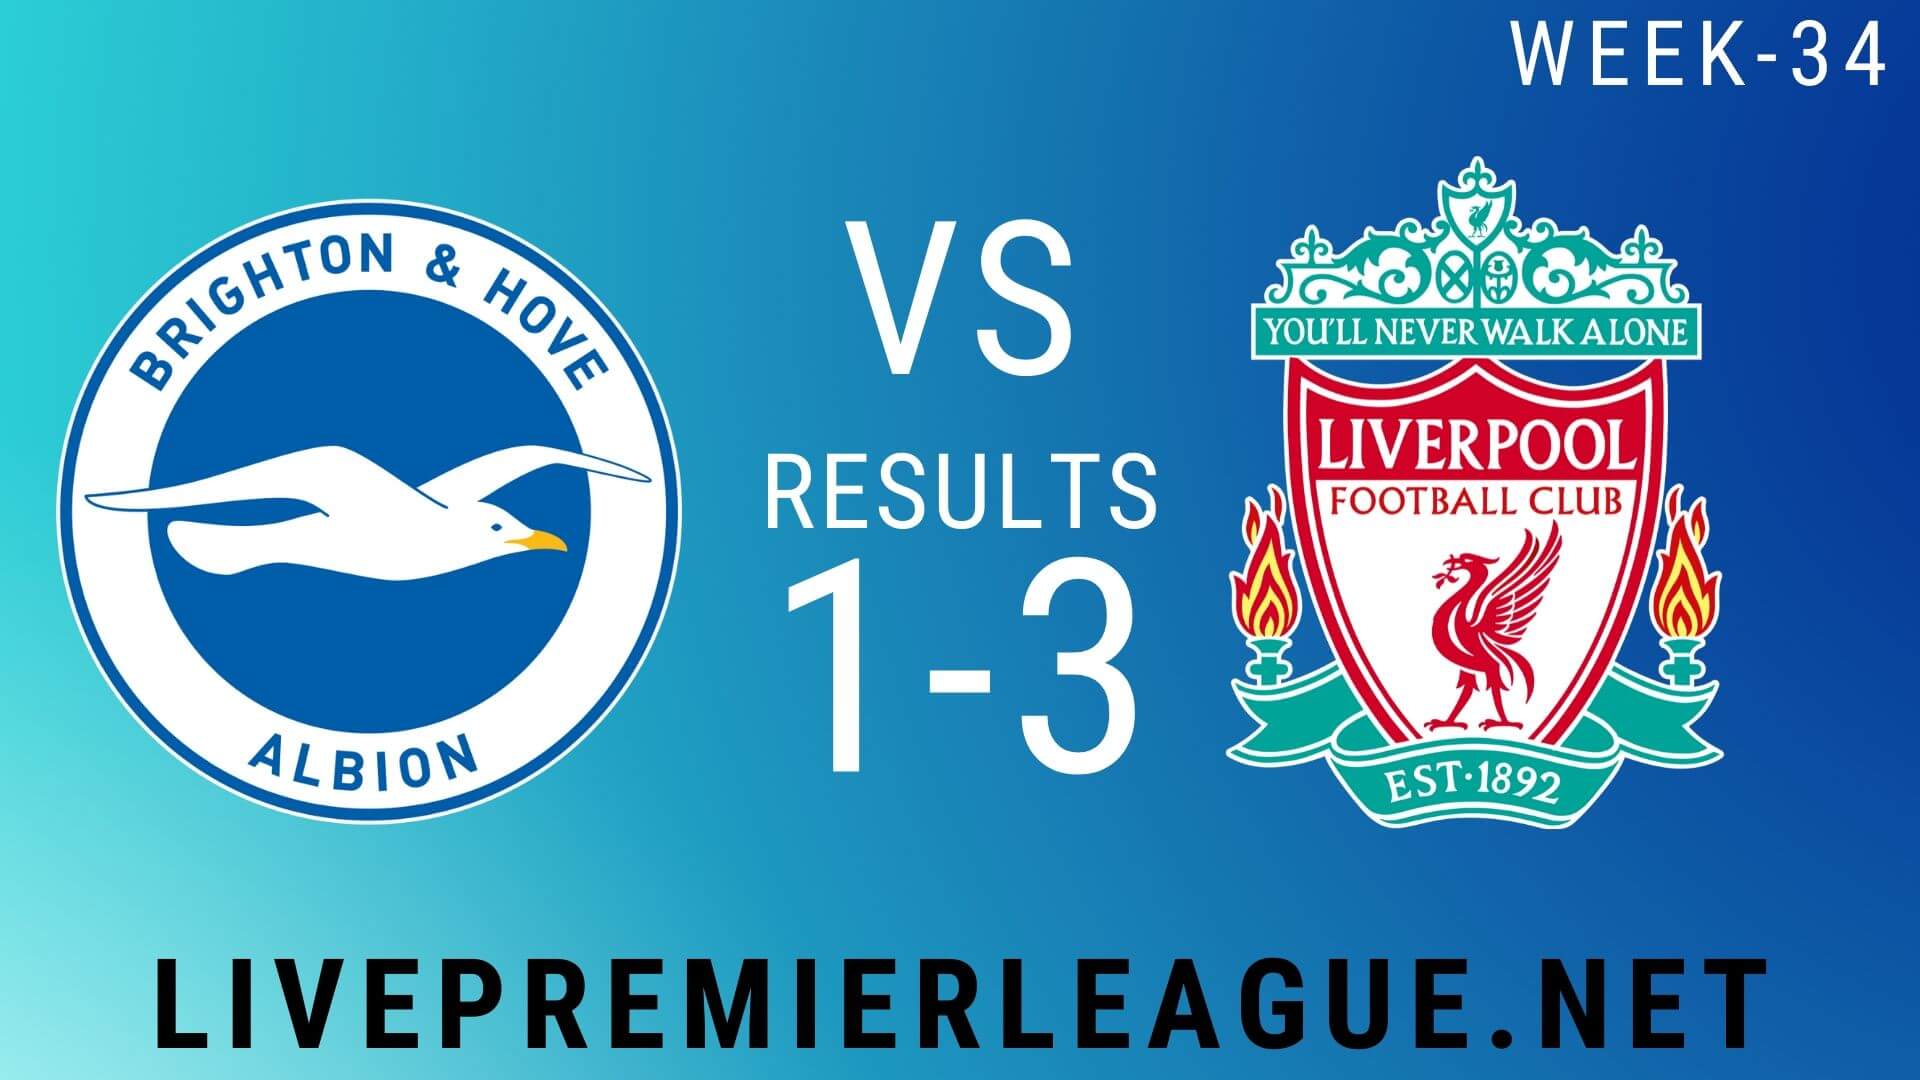 Brighton and Hove Albion Vs Liverpool | Week 34 Result 2020